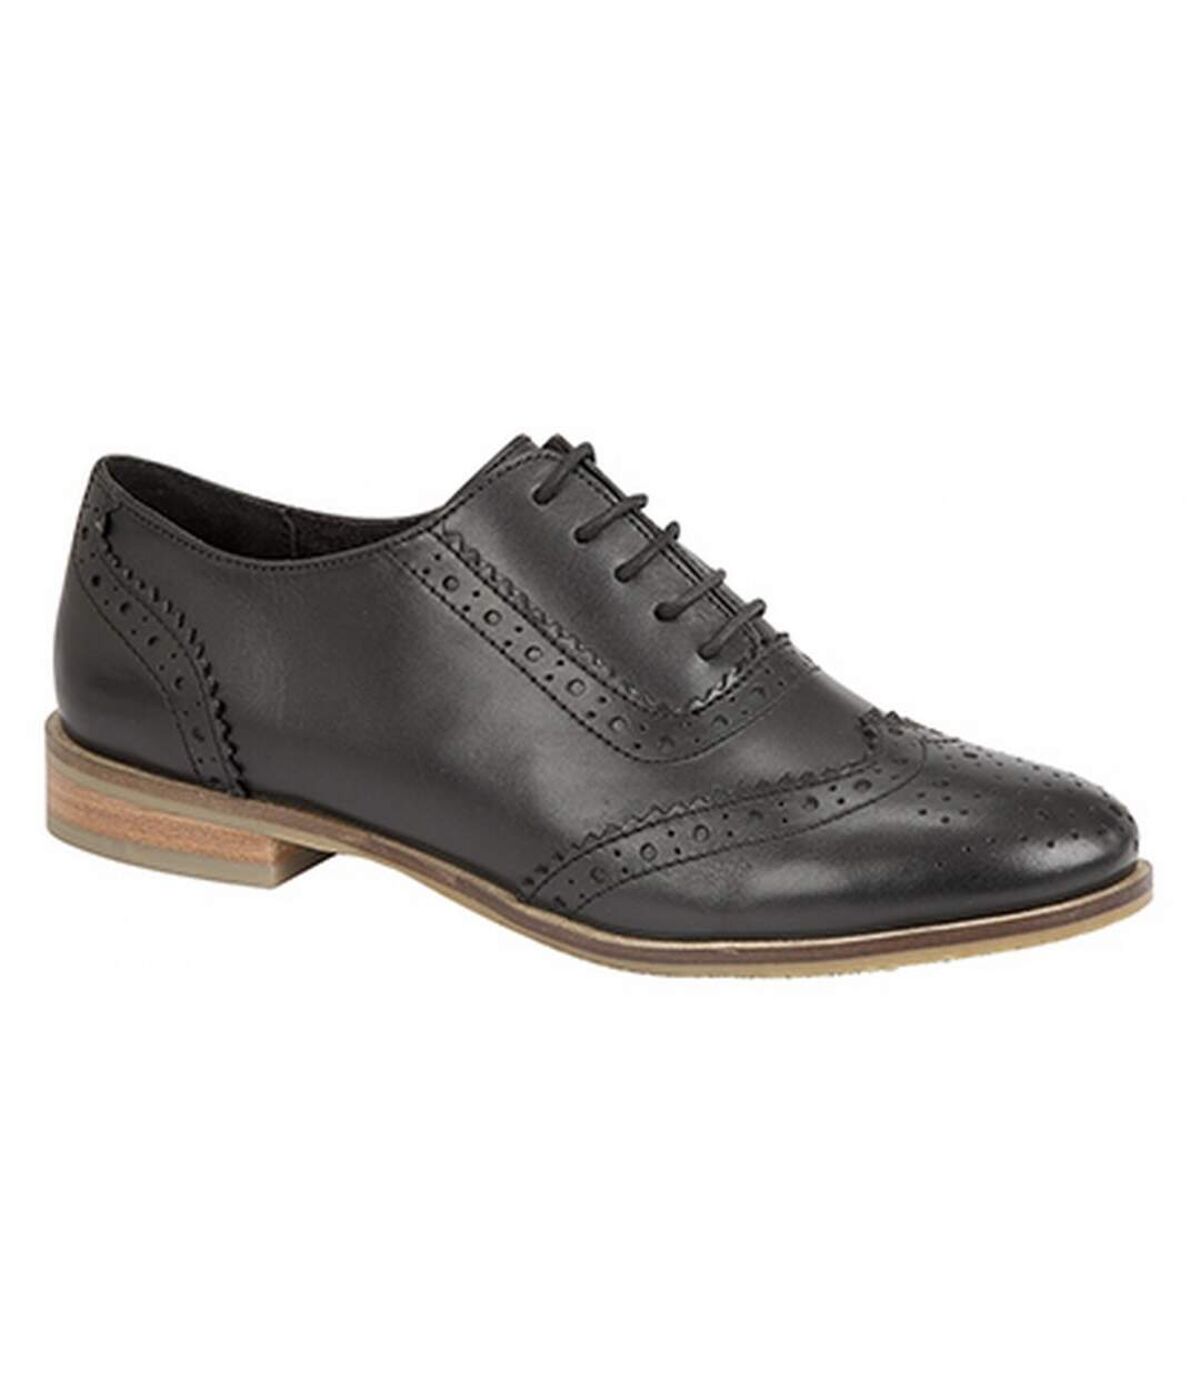 Cipriata Womens/Ladies Brogue Oxford Lace Up Leather Shoes (Black) - UTDF1187